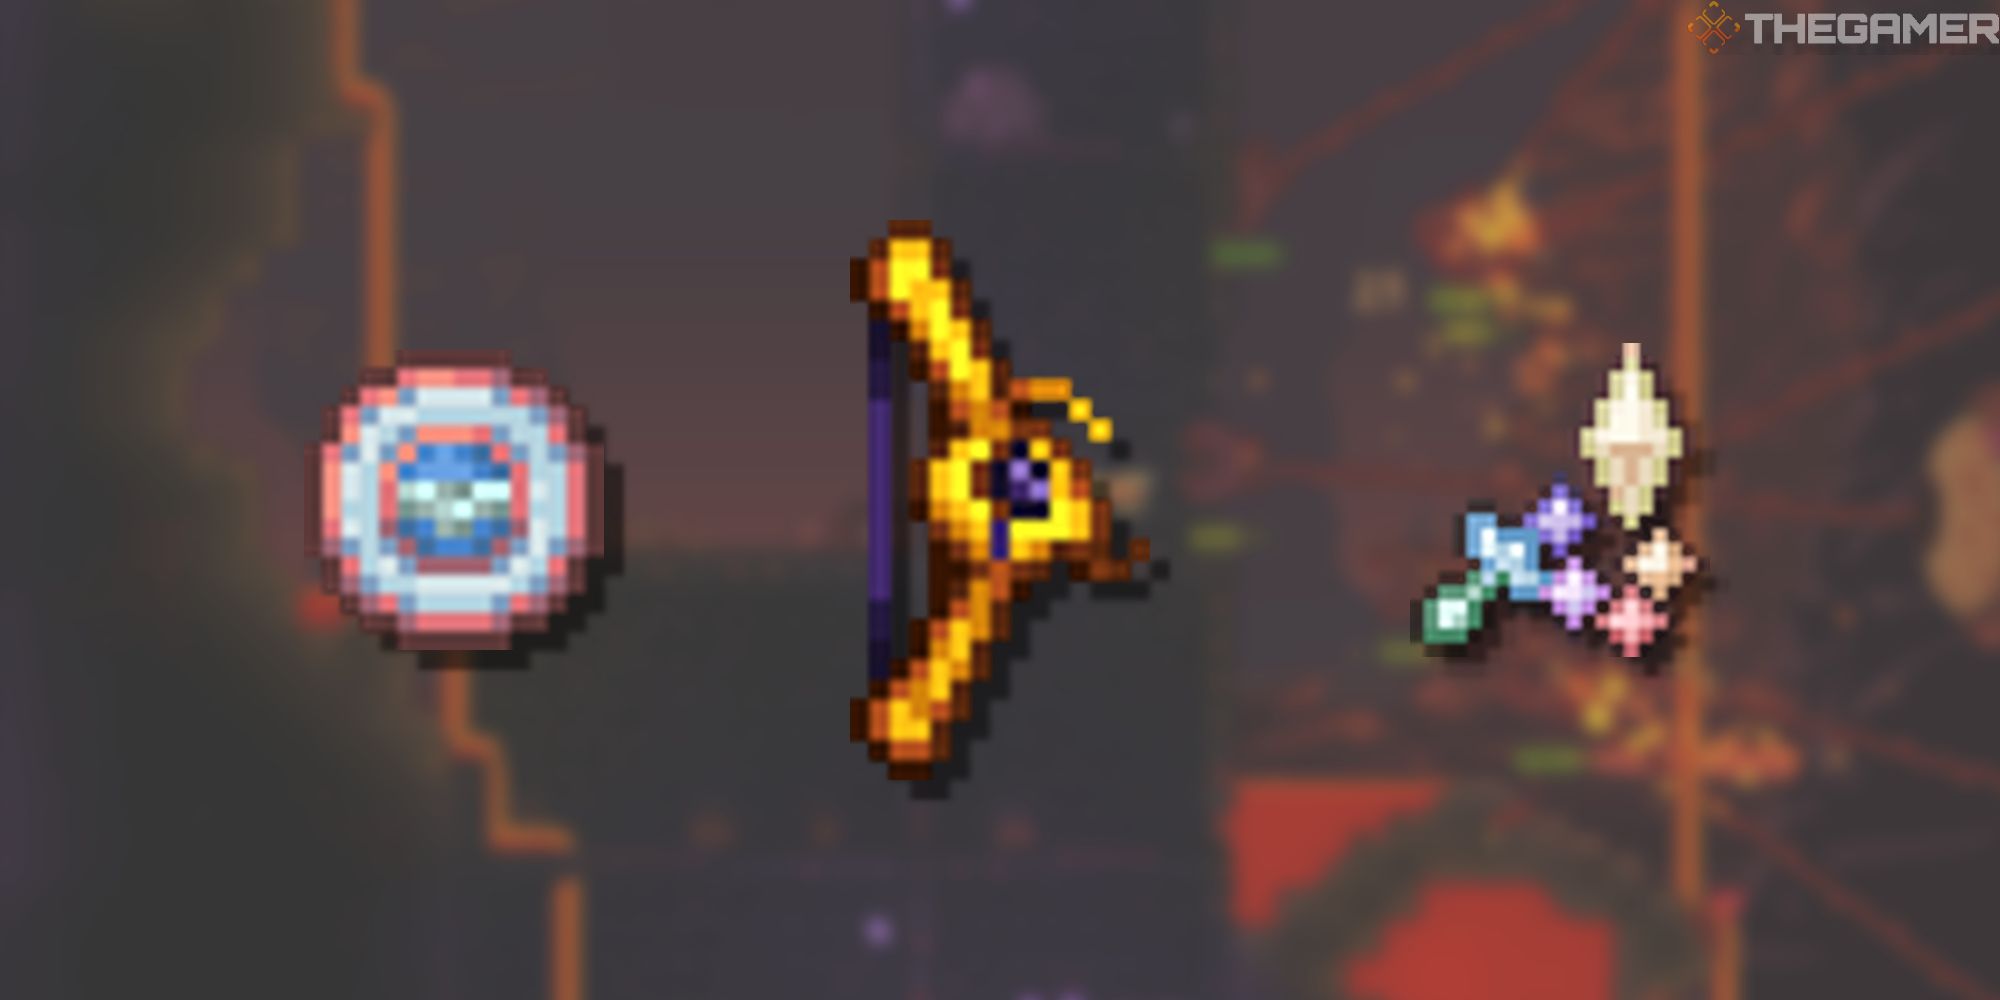 terraria best classes featured image showing sergeant united shield, the bees knees, and kaleidoscope